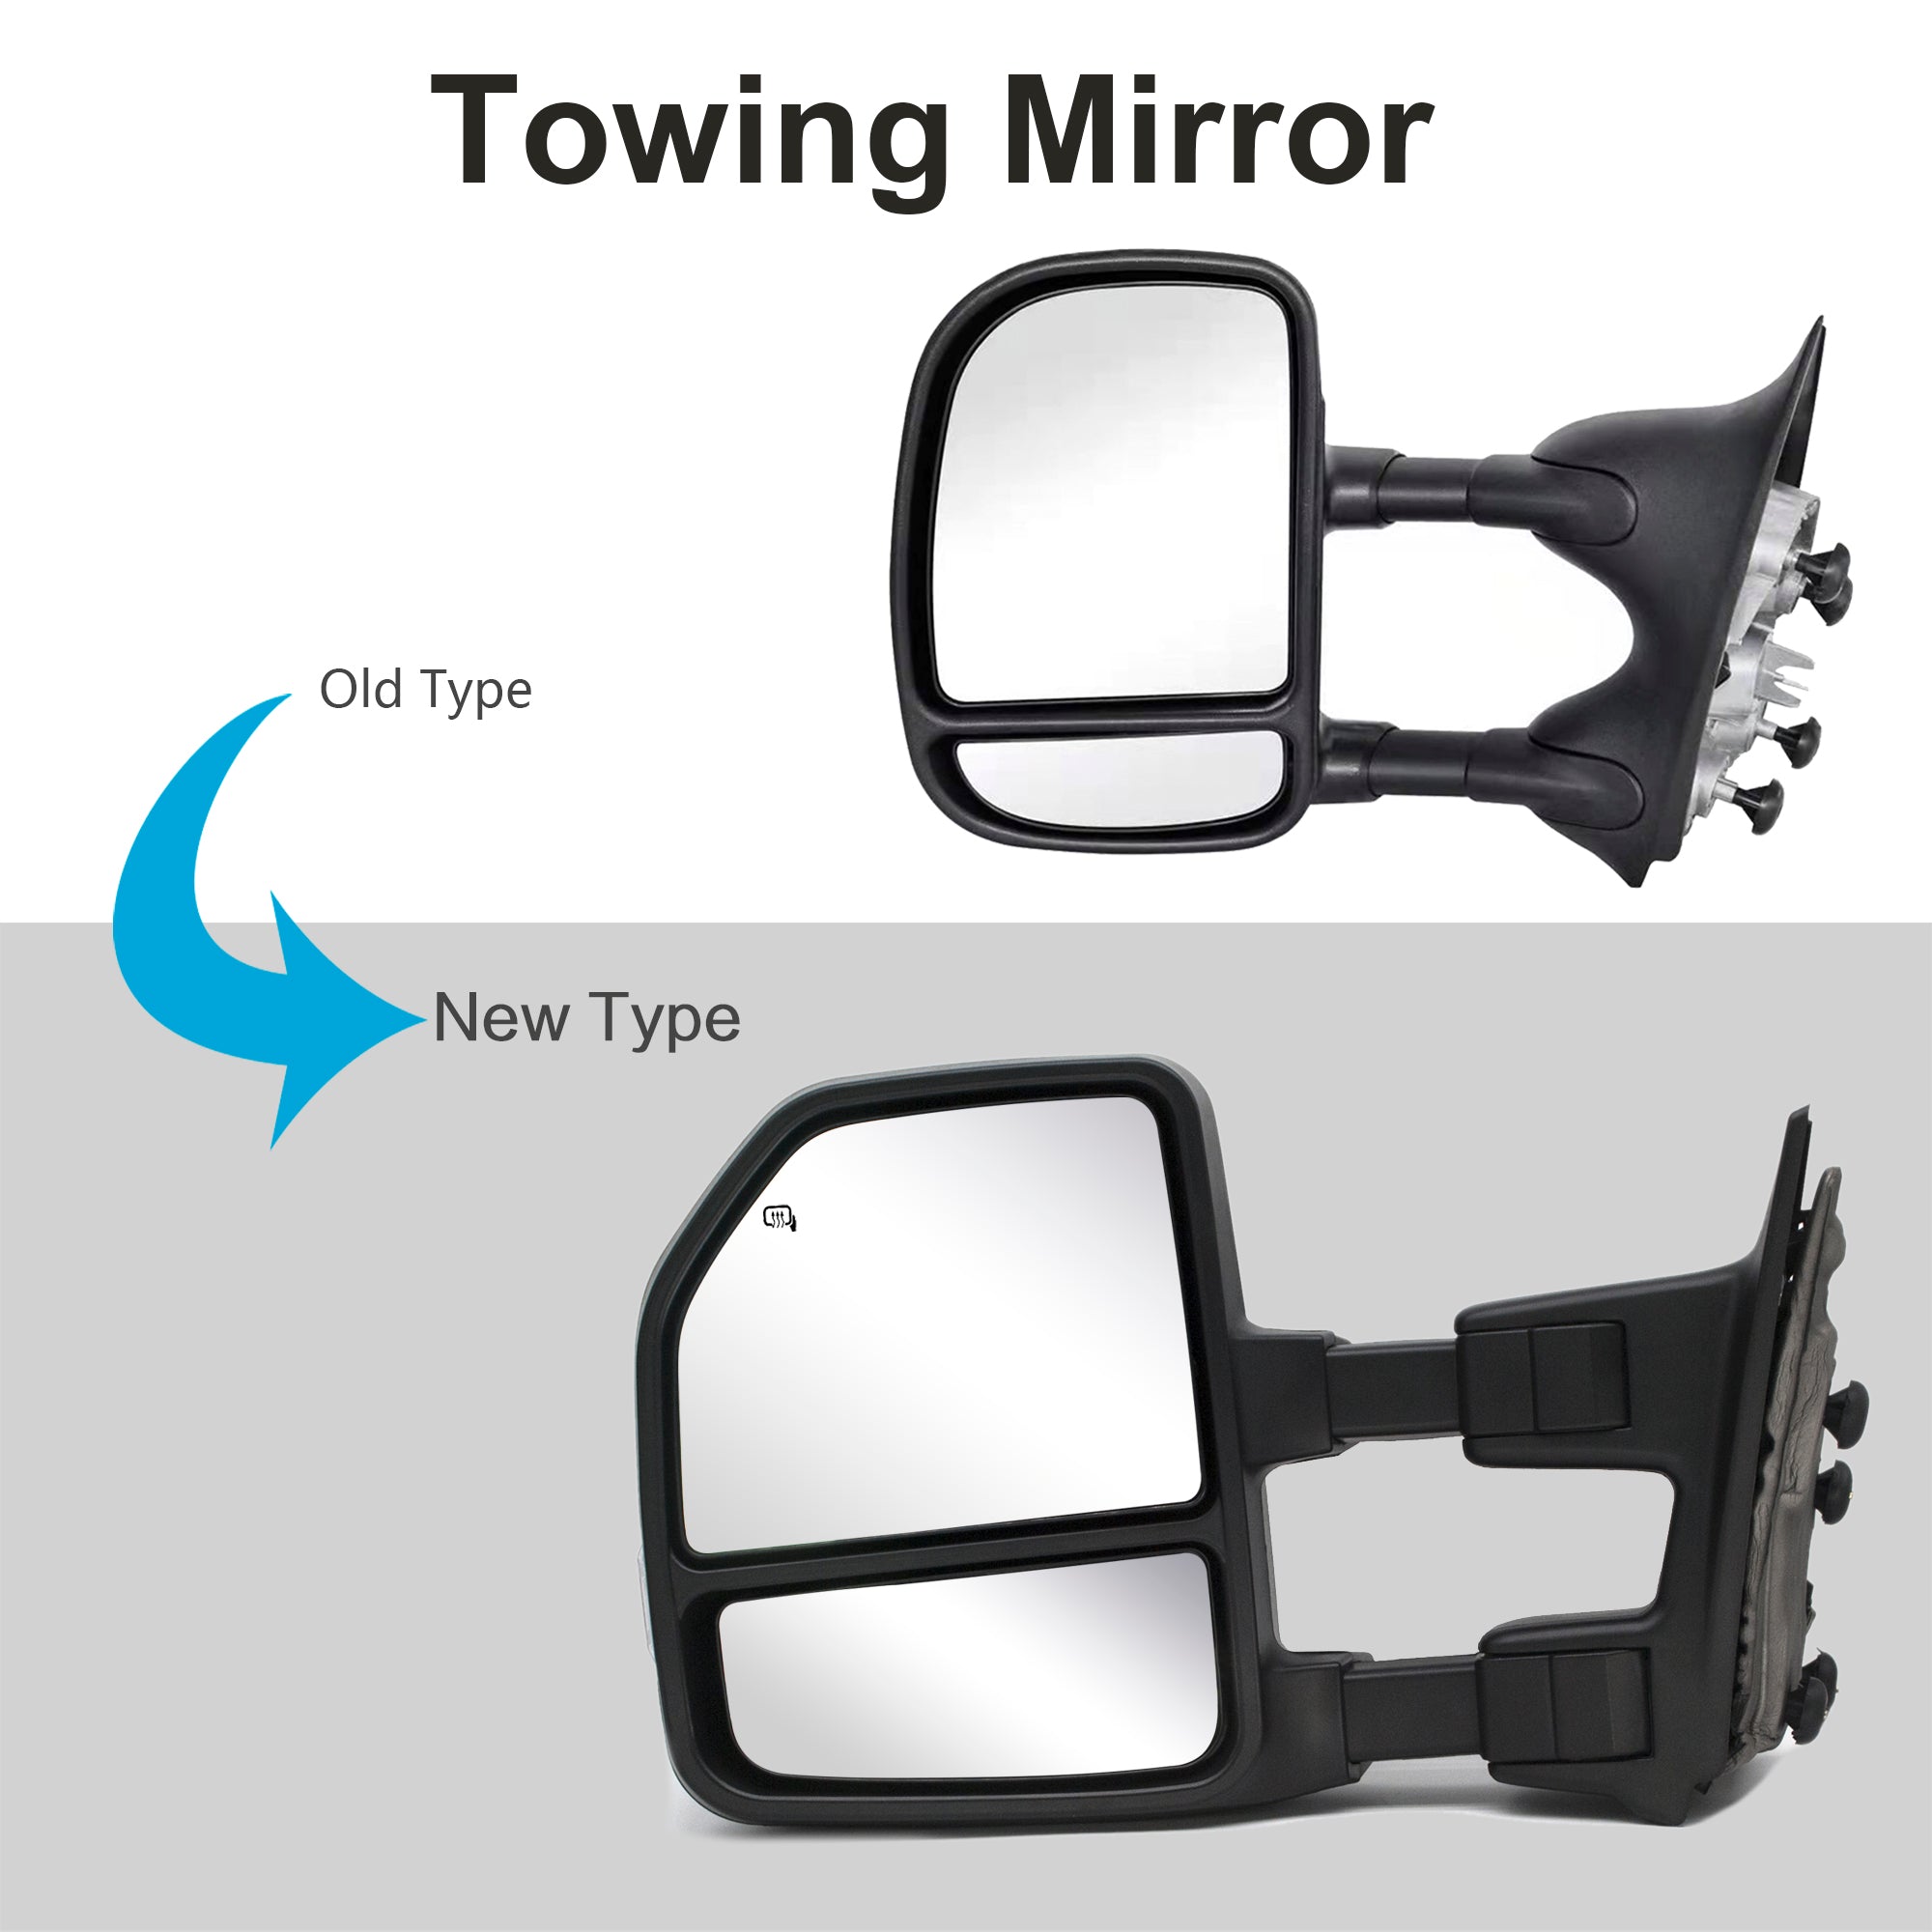 Towing Mirrors for 1999-2016 Ford F250/350/450/550 Super Duty Power Heated Turn Signal Clearance Lamp 20B